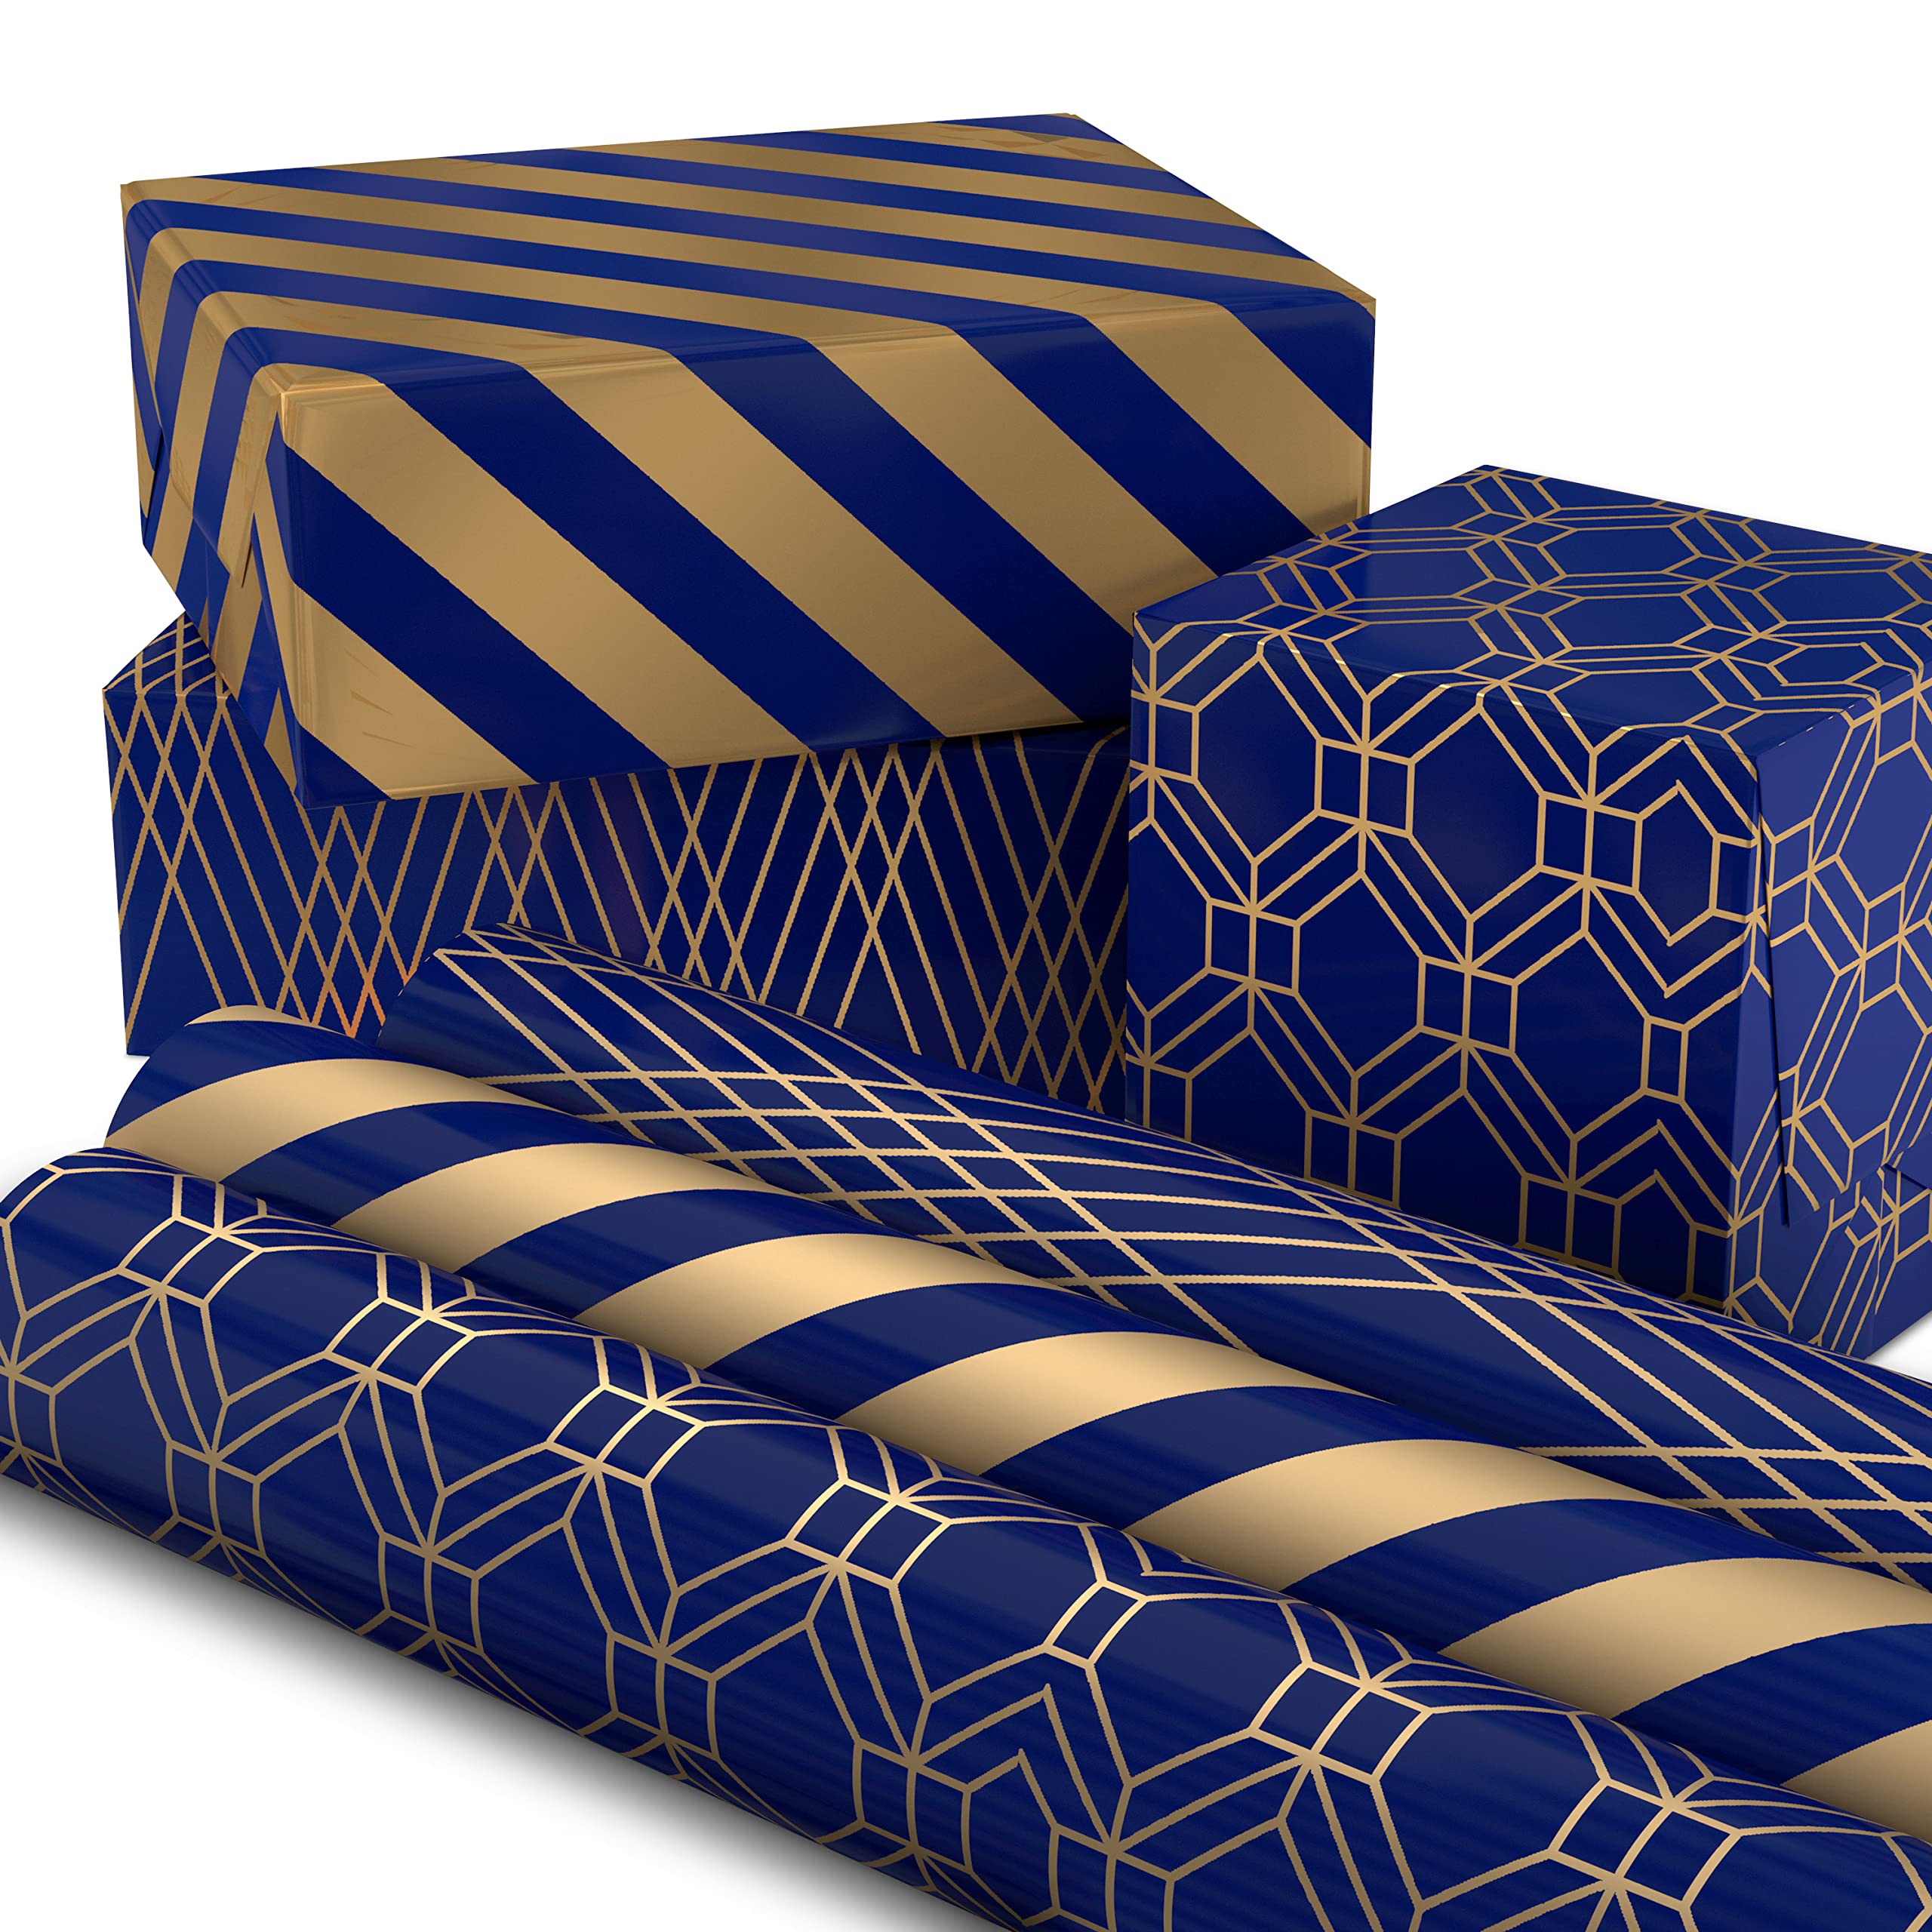 Hallmark Metallic Wrapping Paper Bundle with Cutlines on Reverse (6 Rolls: 210 Square Feet Total) Navy, Gold, Silver and White for Birthdays, Weddings, Graduations, Hanukkah, Christmas